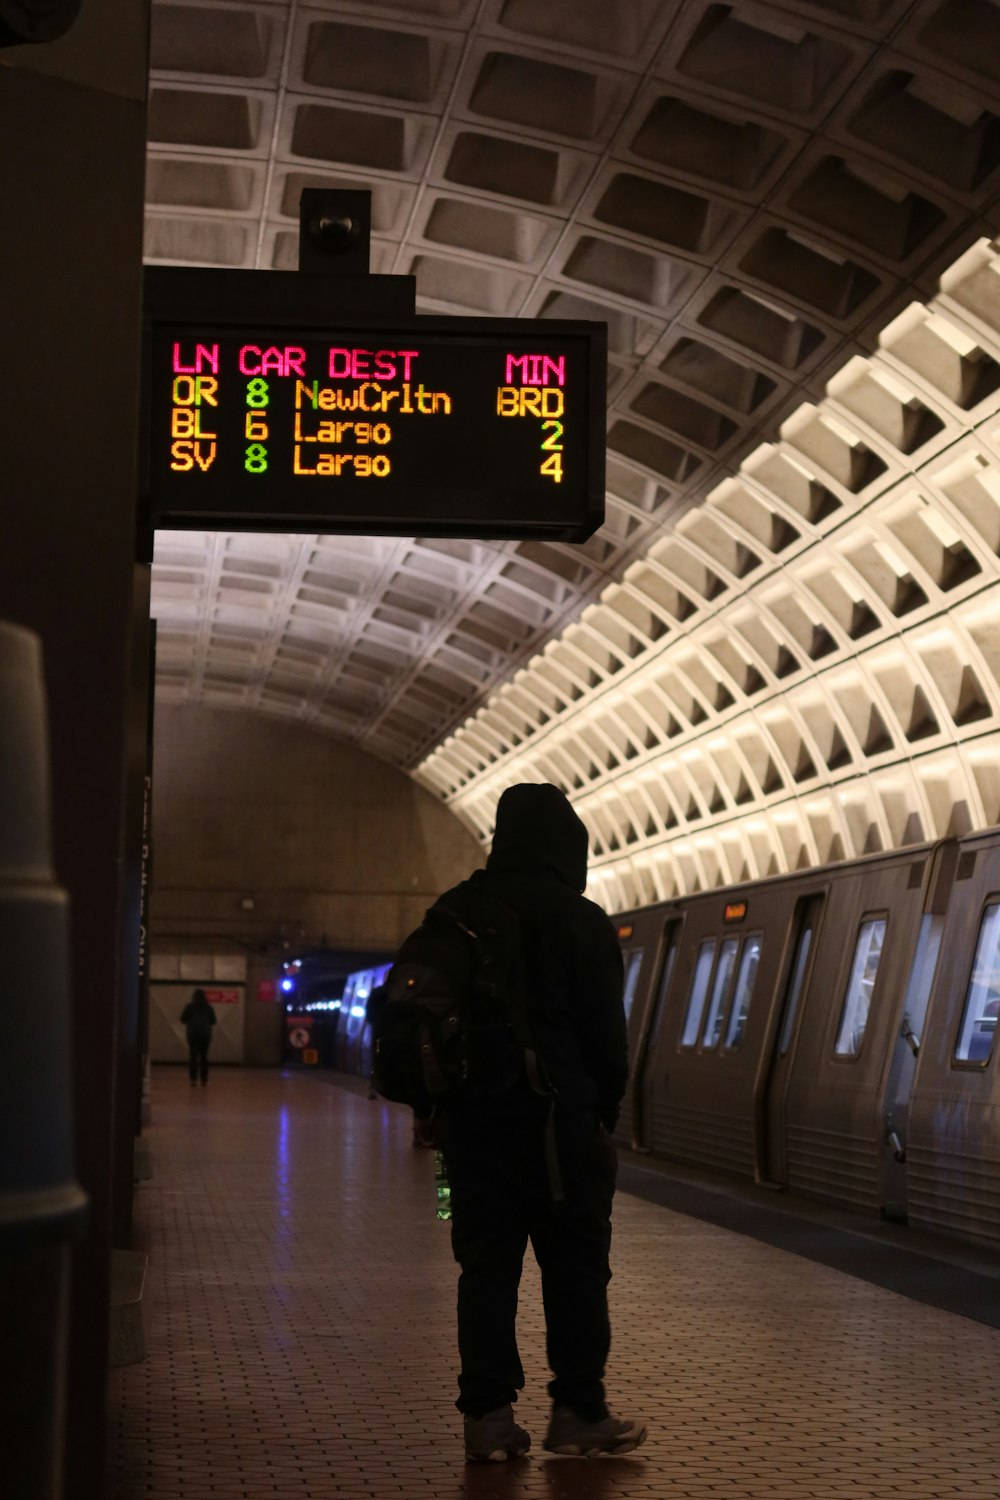 a person standing in a subway station waiting for a train